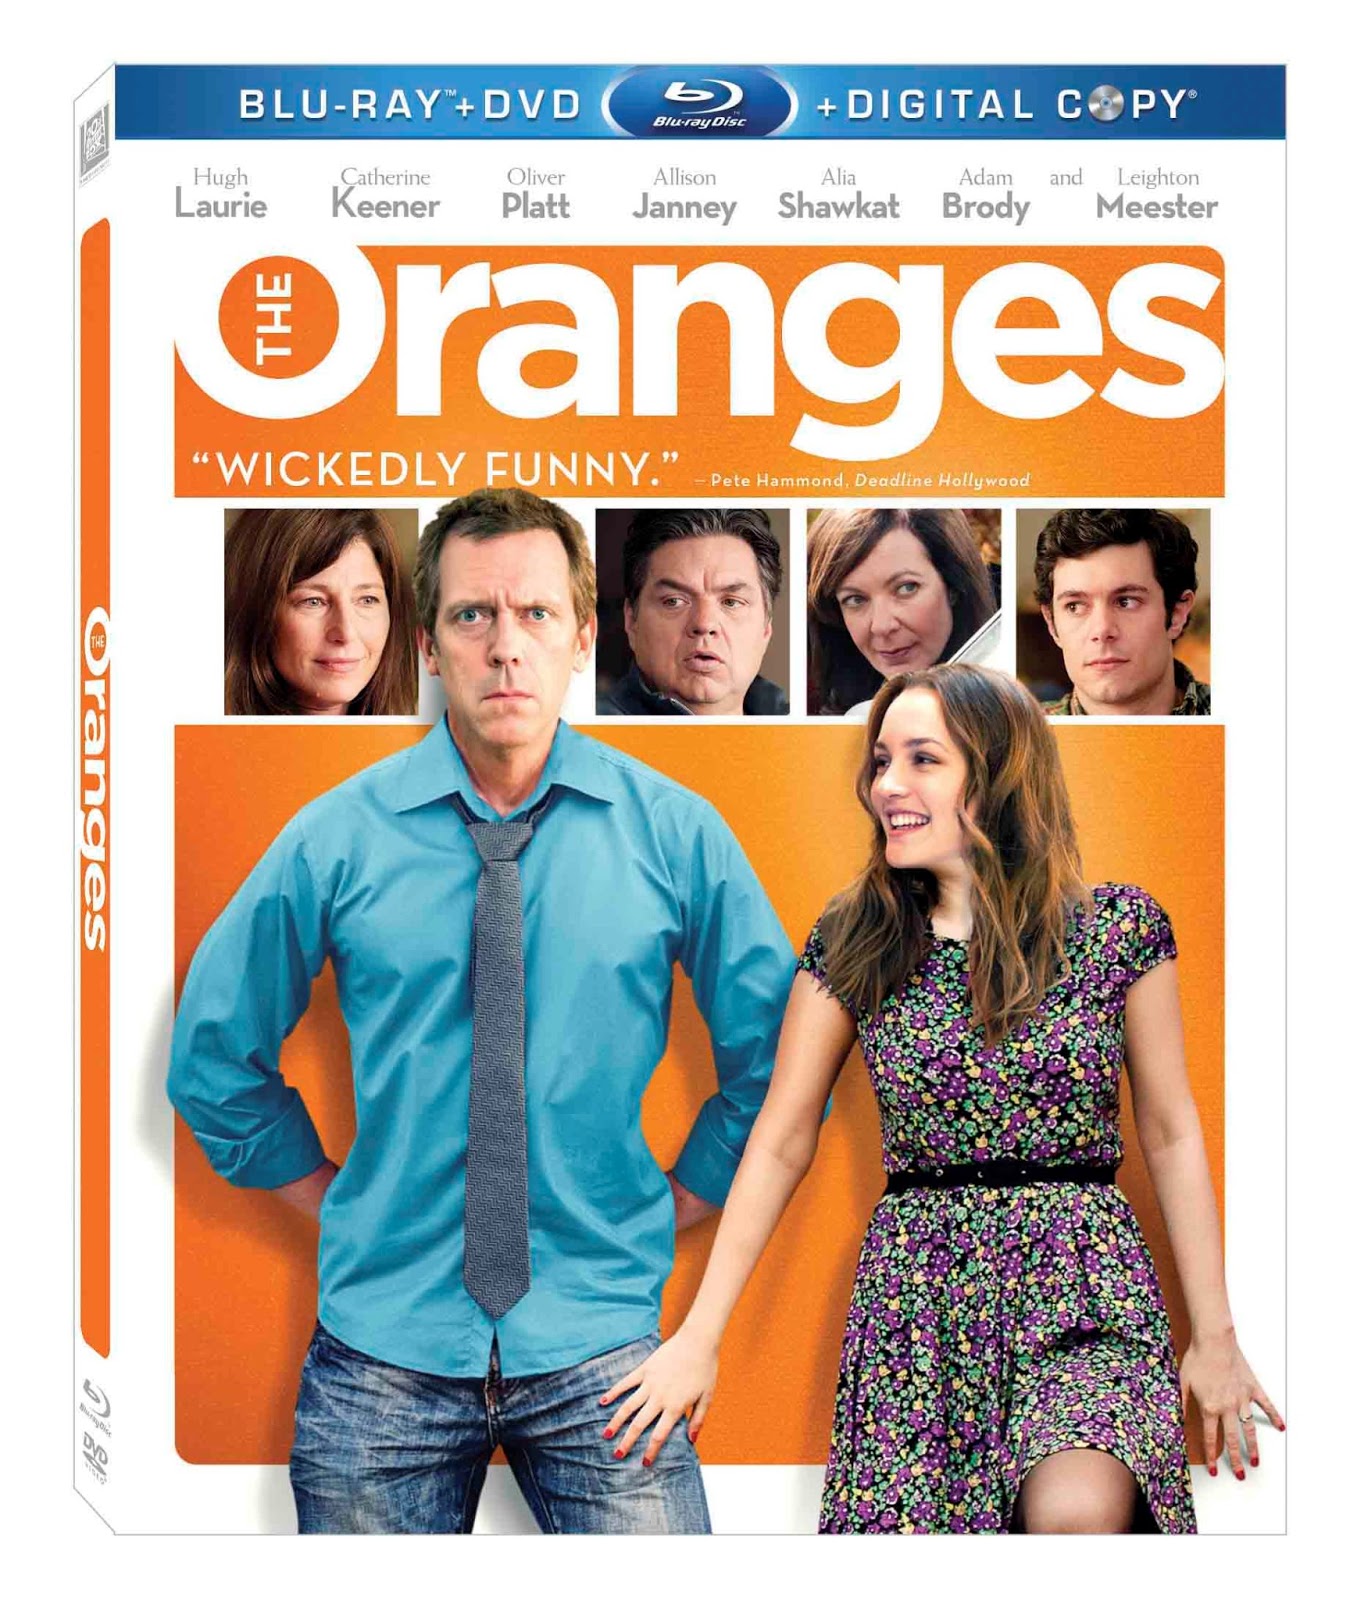 THE ORANGES is available on DVD Blu-ray May 7th